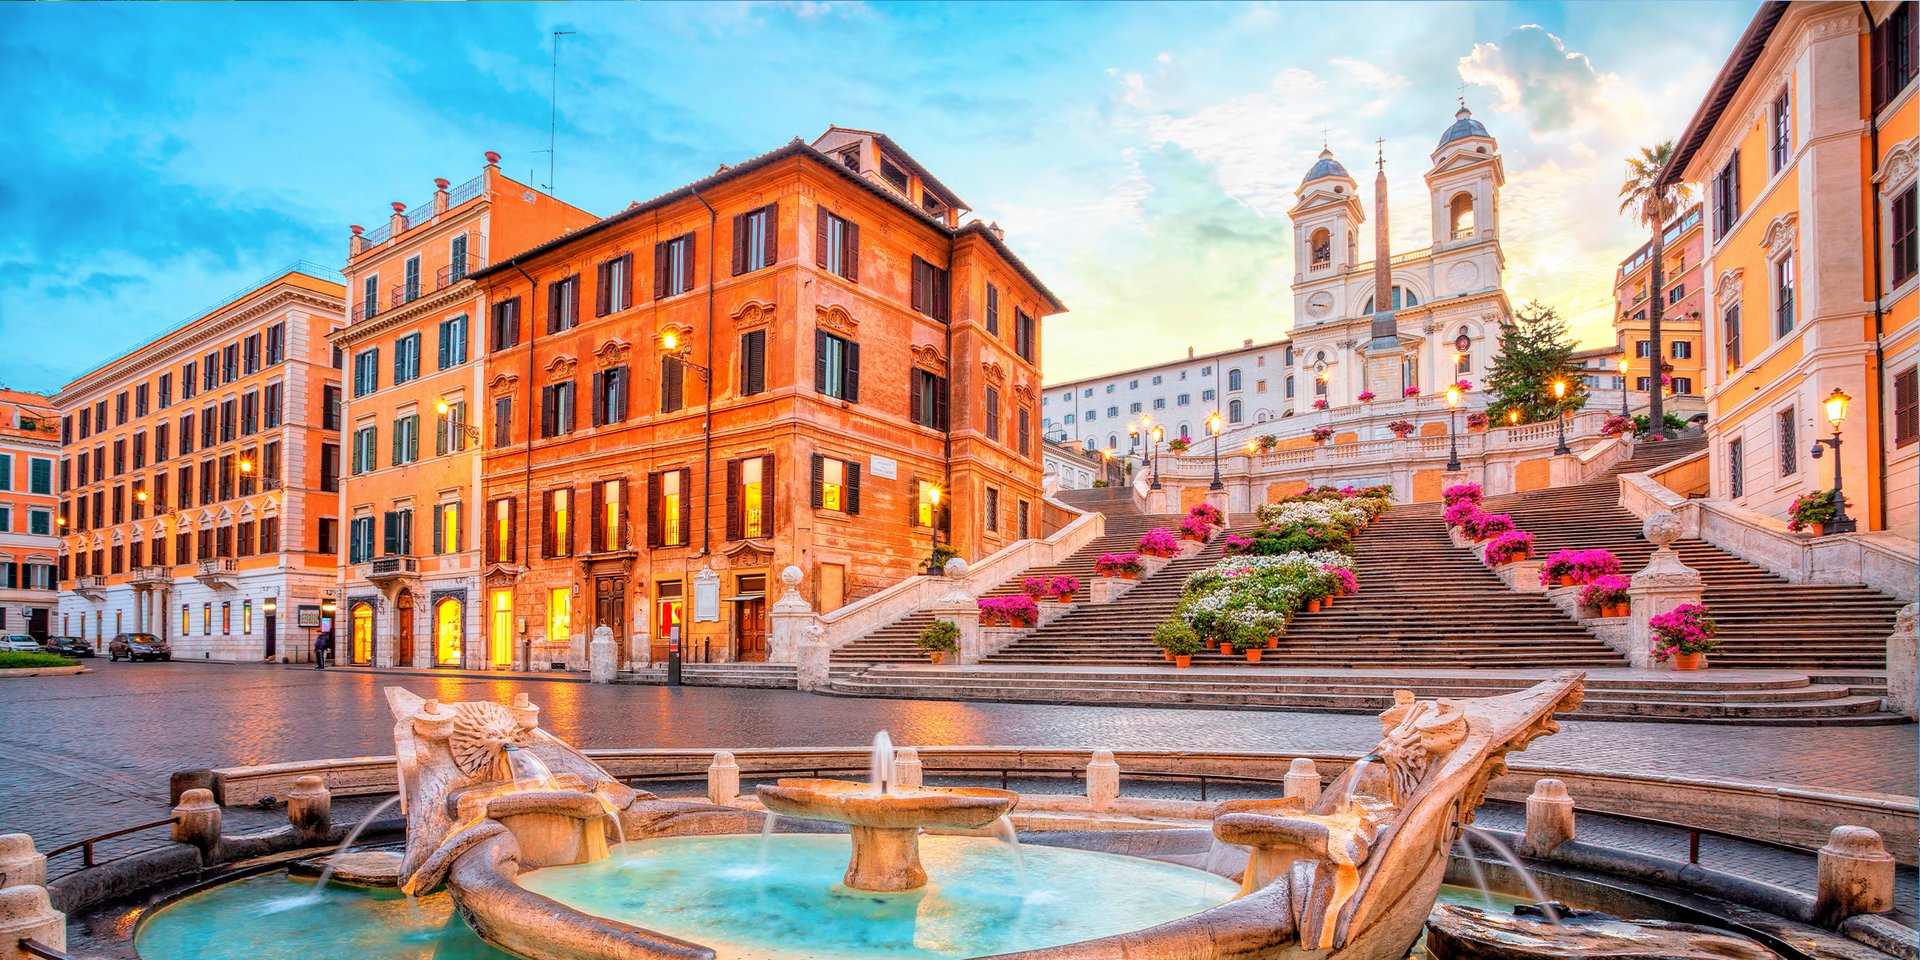 Rome is the perfect starting point for an Italian adventure